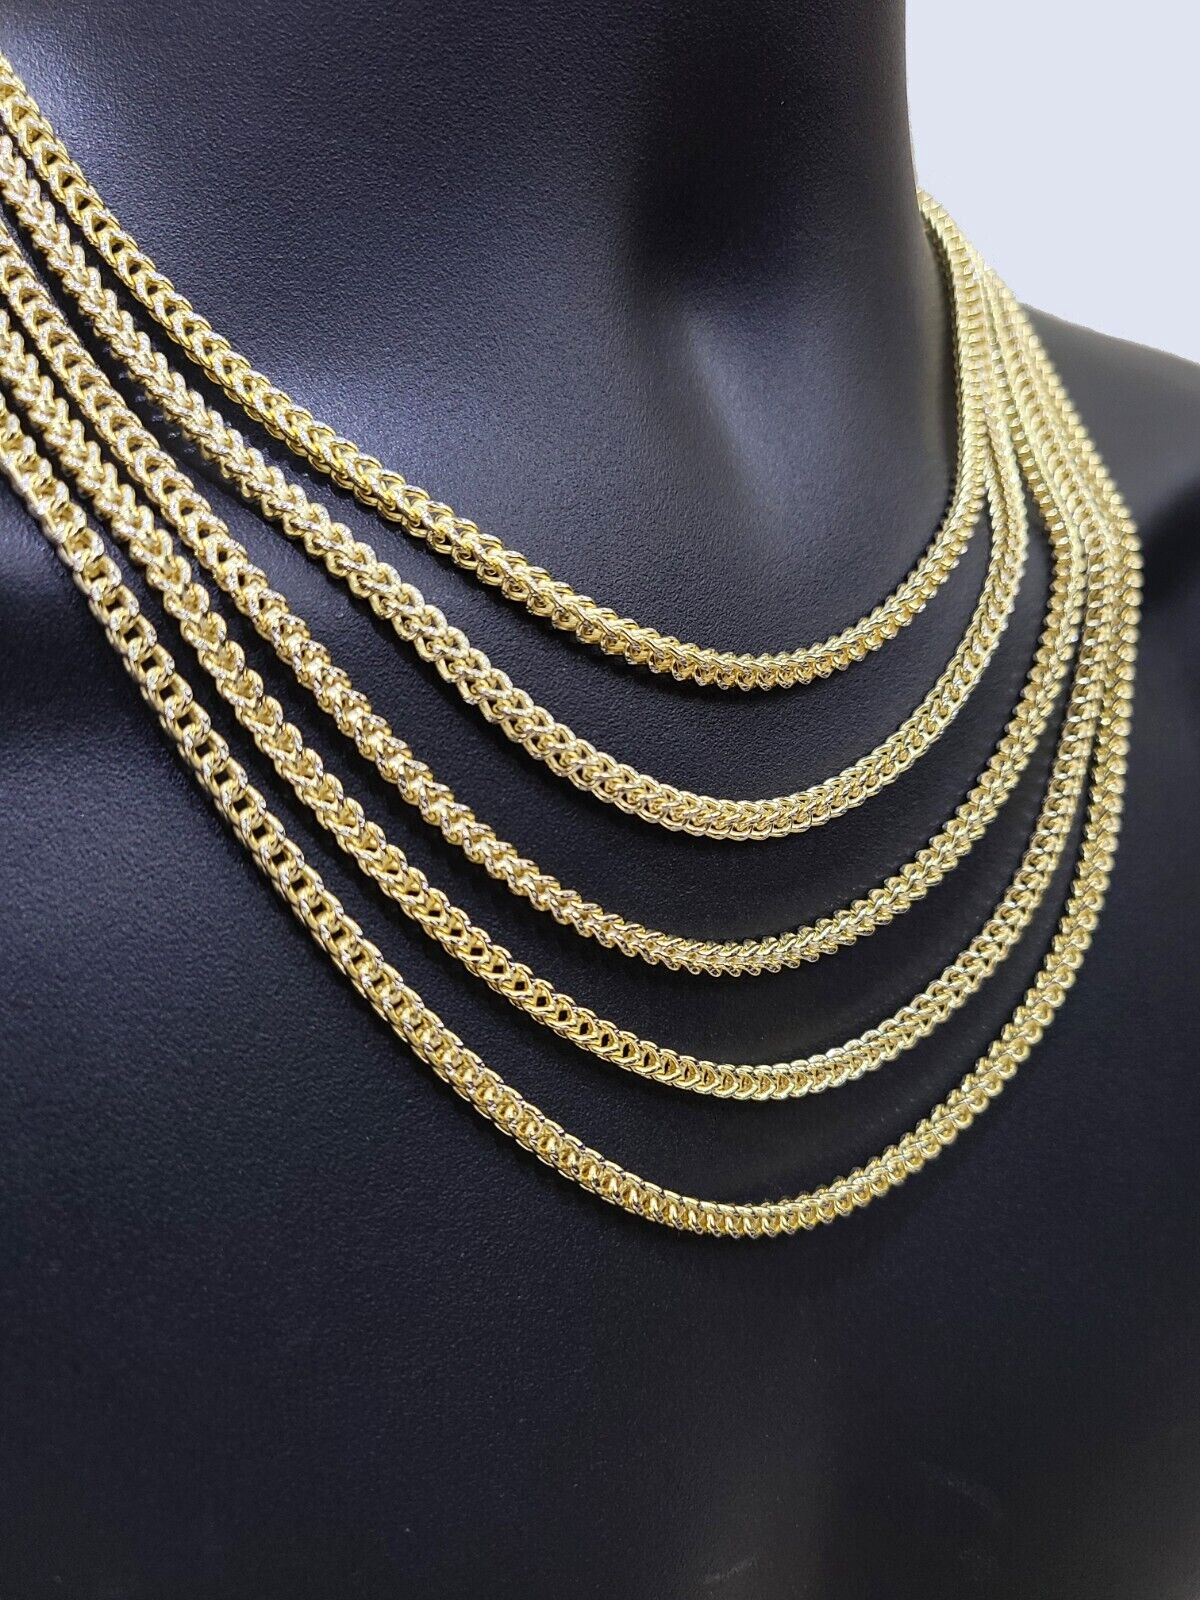 14k Yellow Gold Franco Chain Two-tone Necklace 4mm 20 Inch Diamond Cut 14kt  SALE